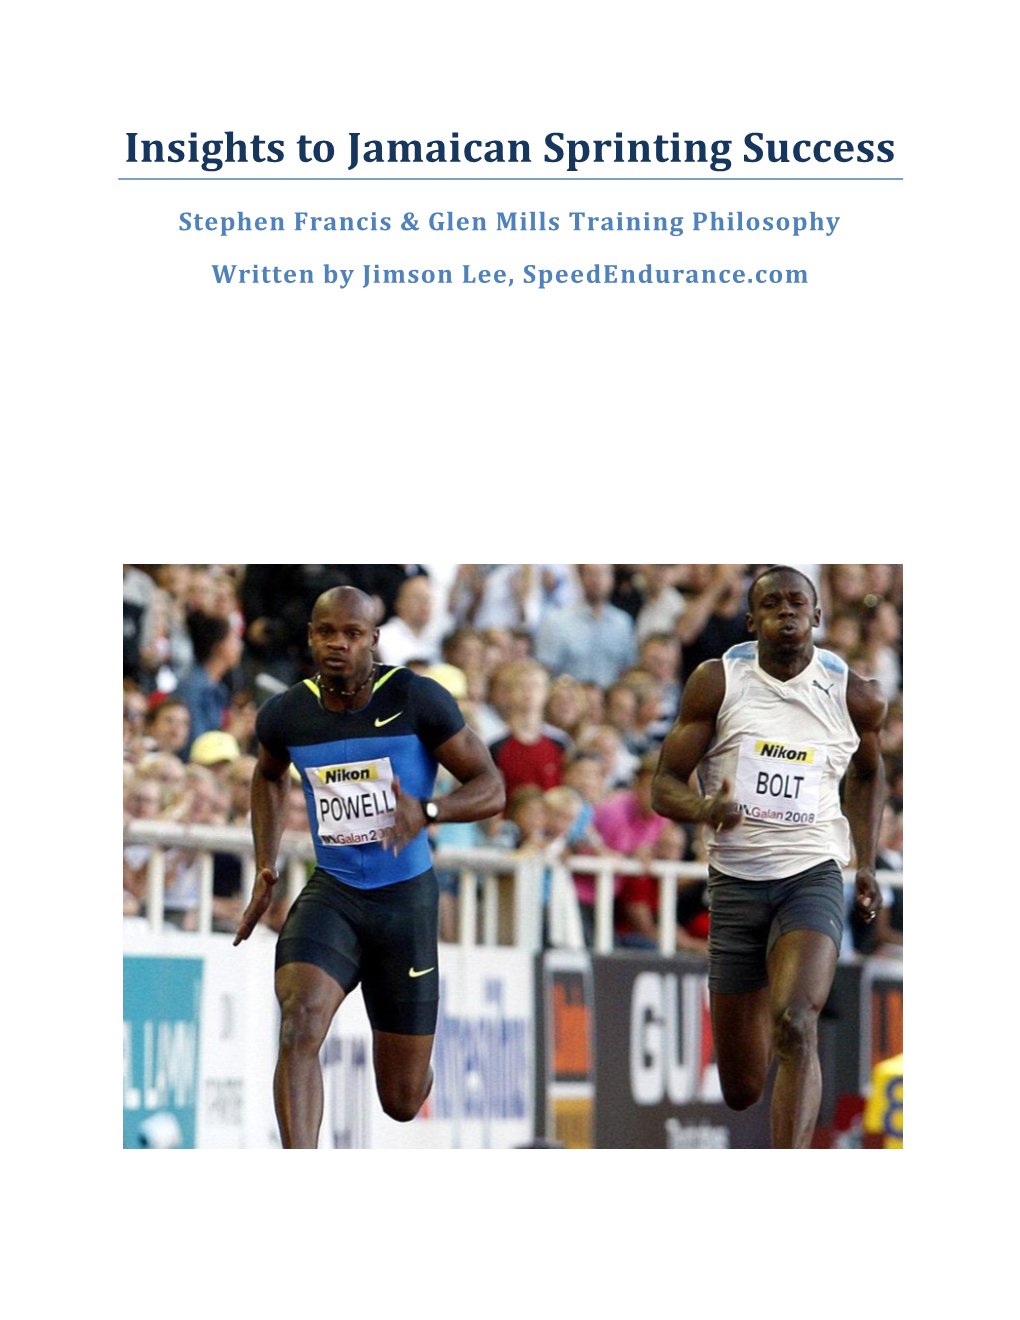 Insights to Jamaican Sprinting Success